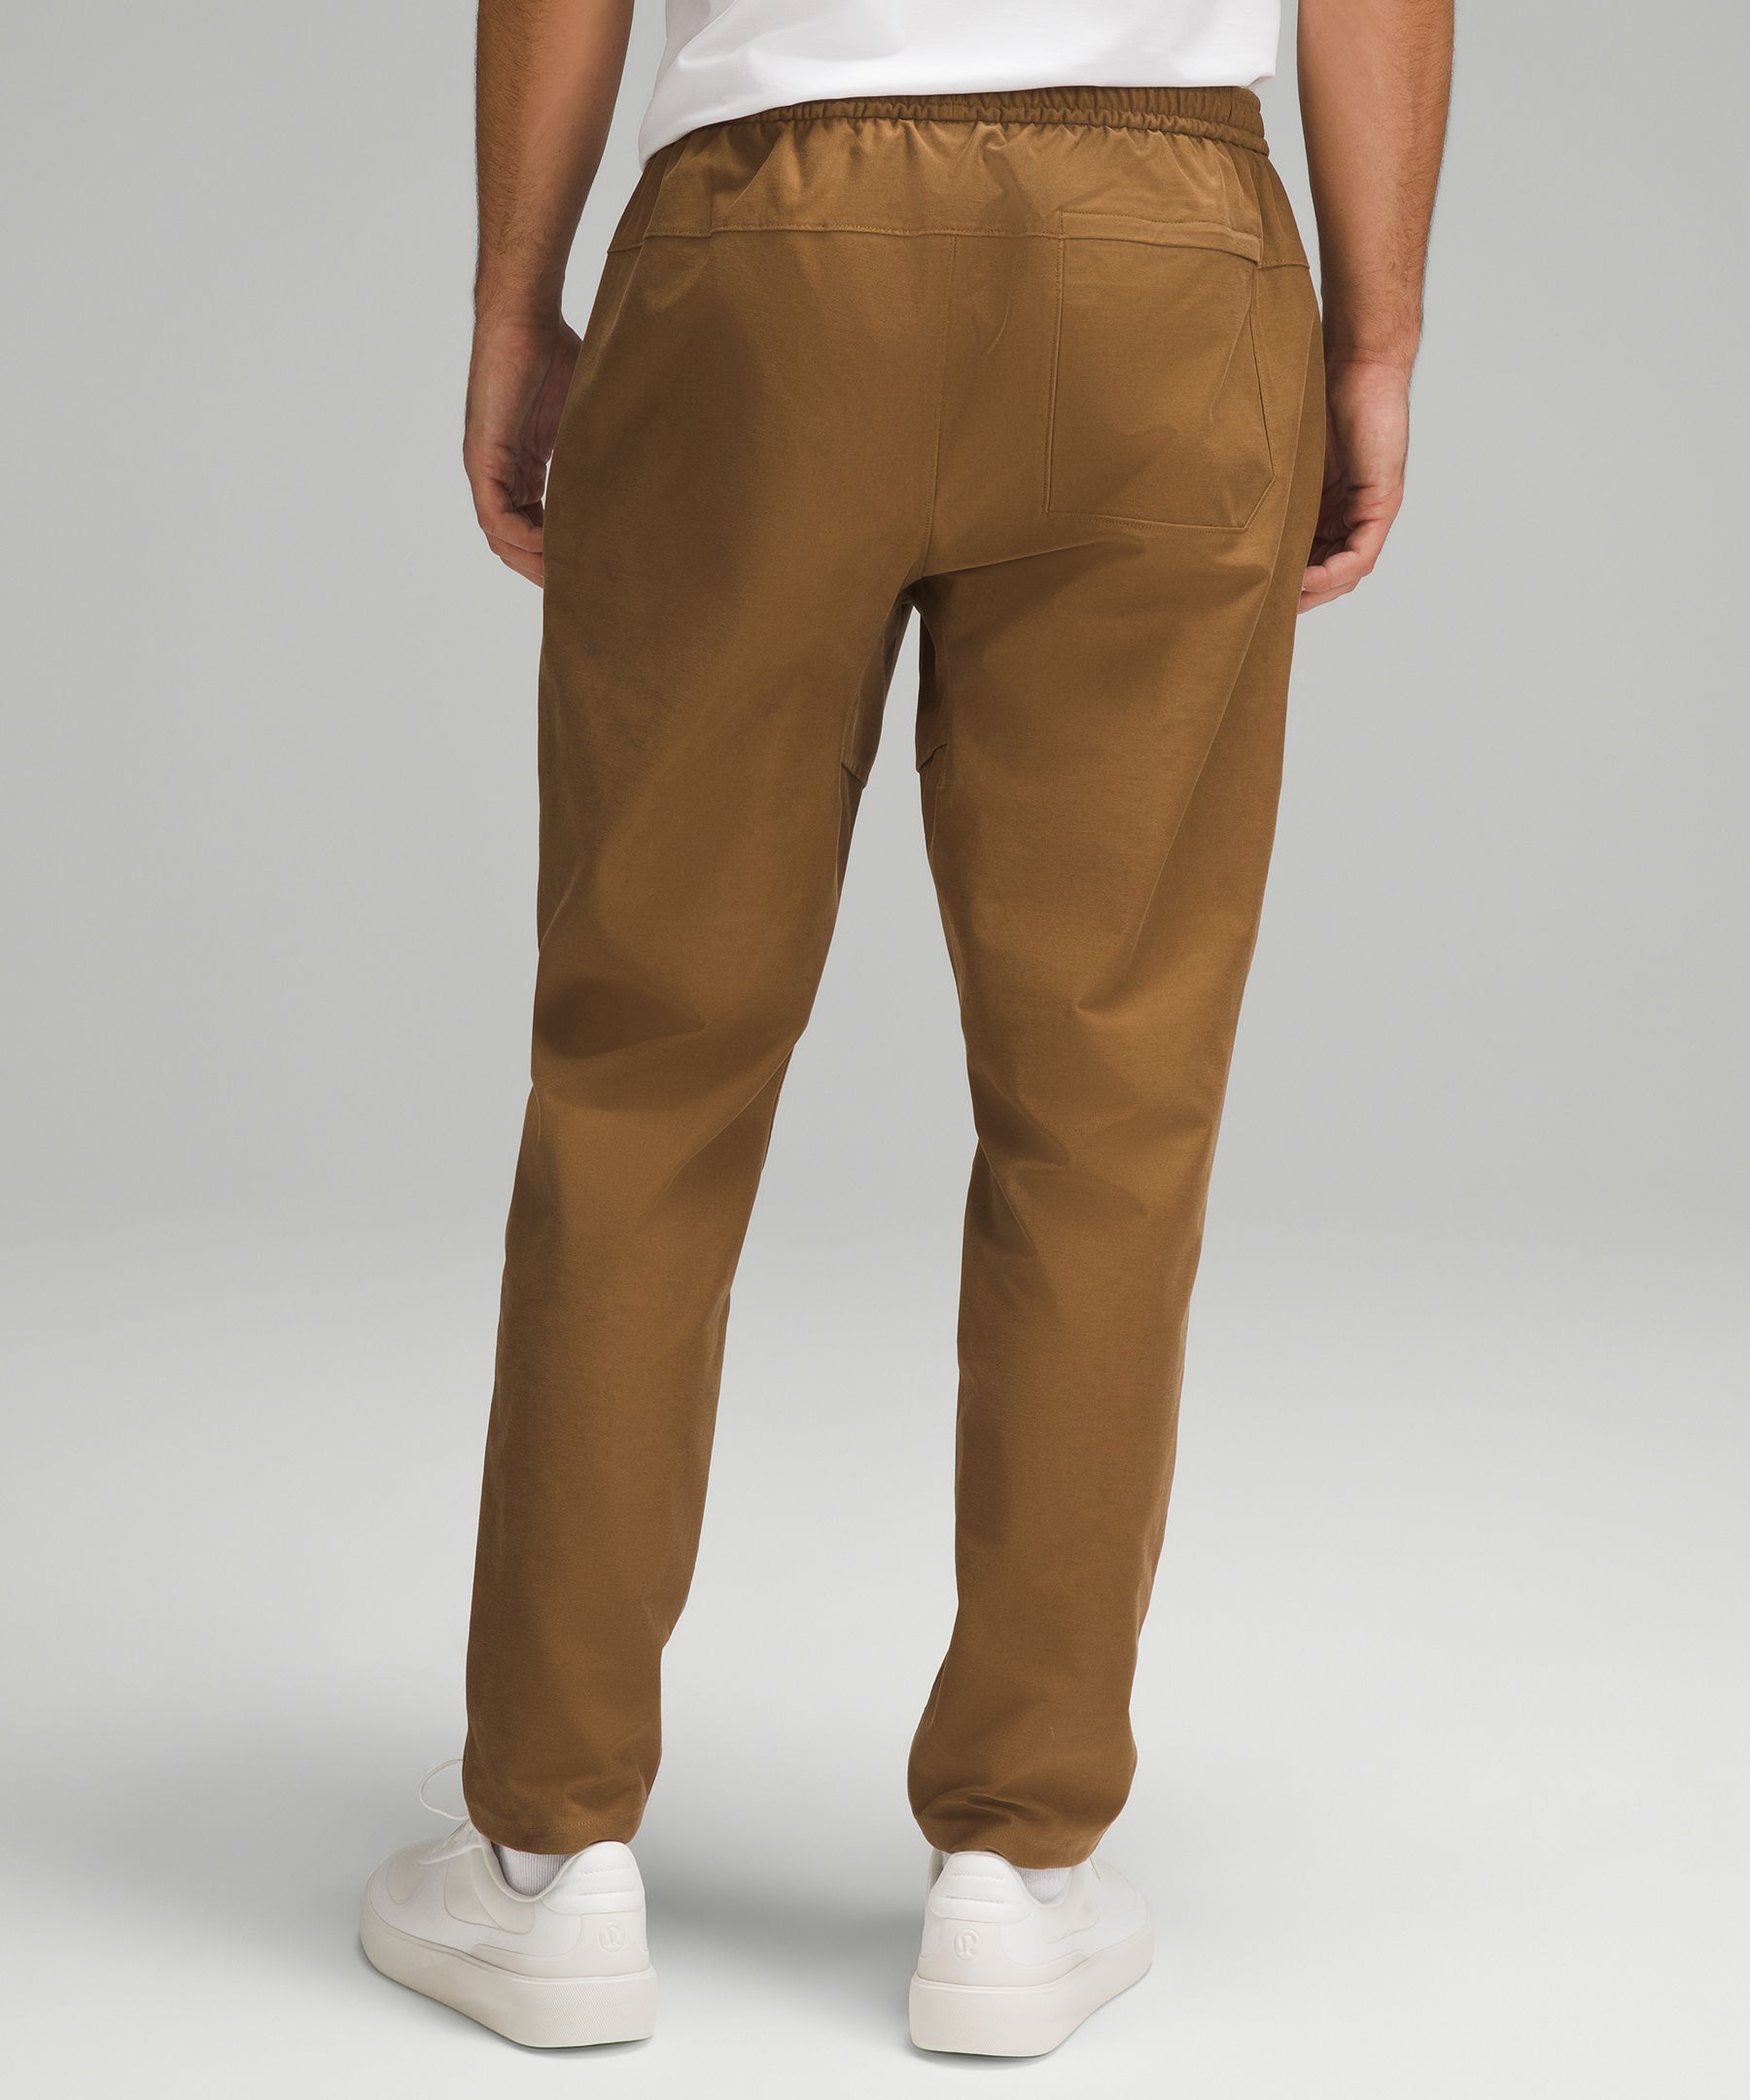 lululemon athletica Utilitech Pull-on Classic-fit Trousers - Color Khaki -  Size L in Natural for Men